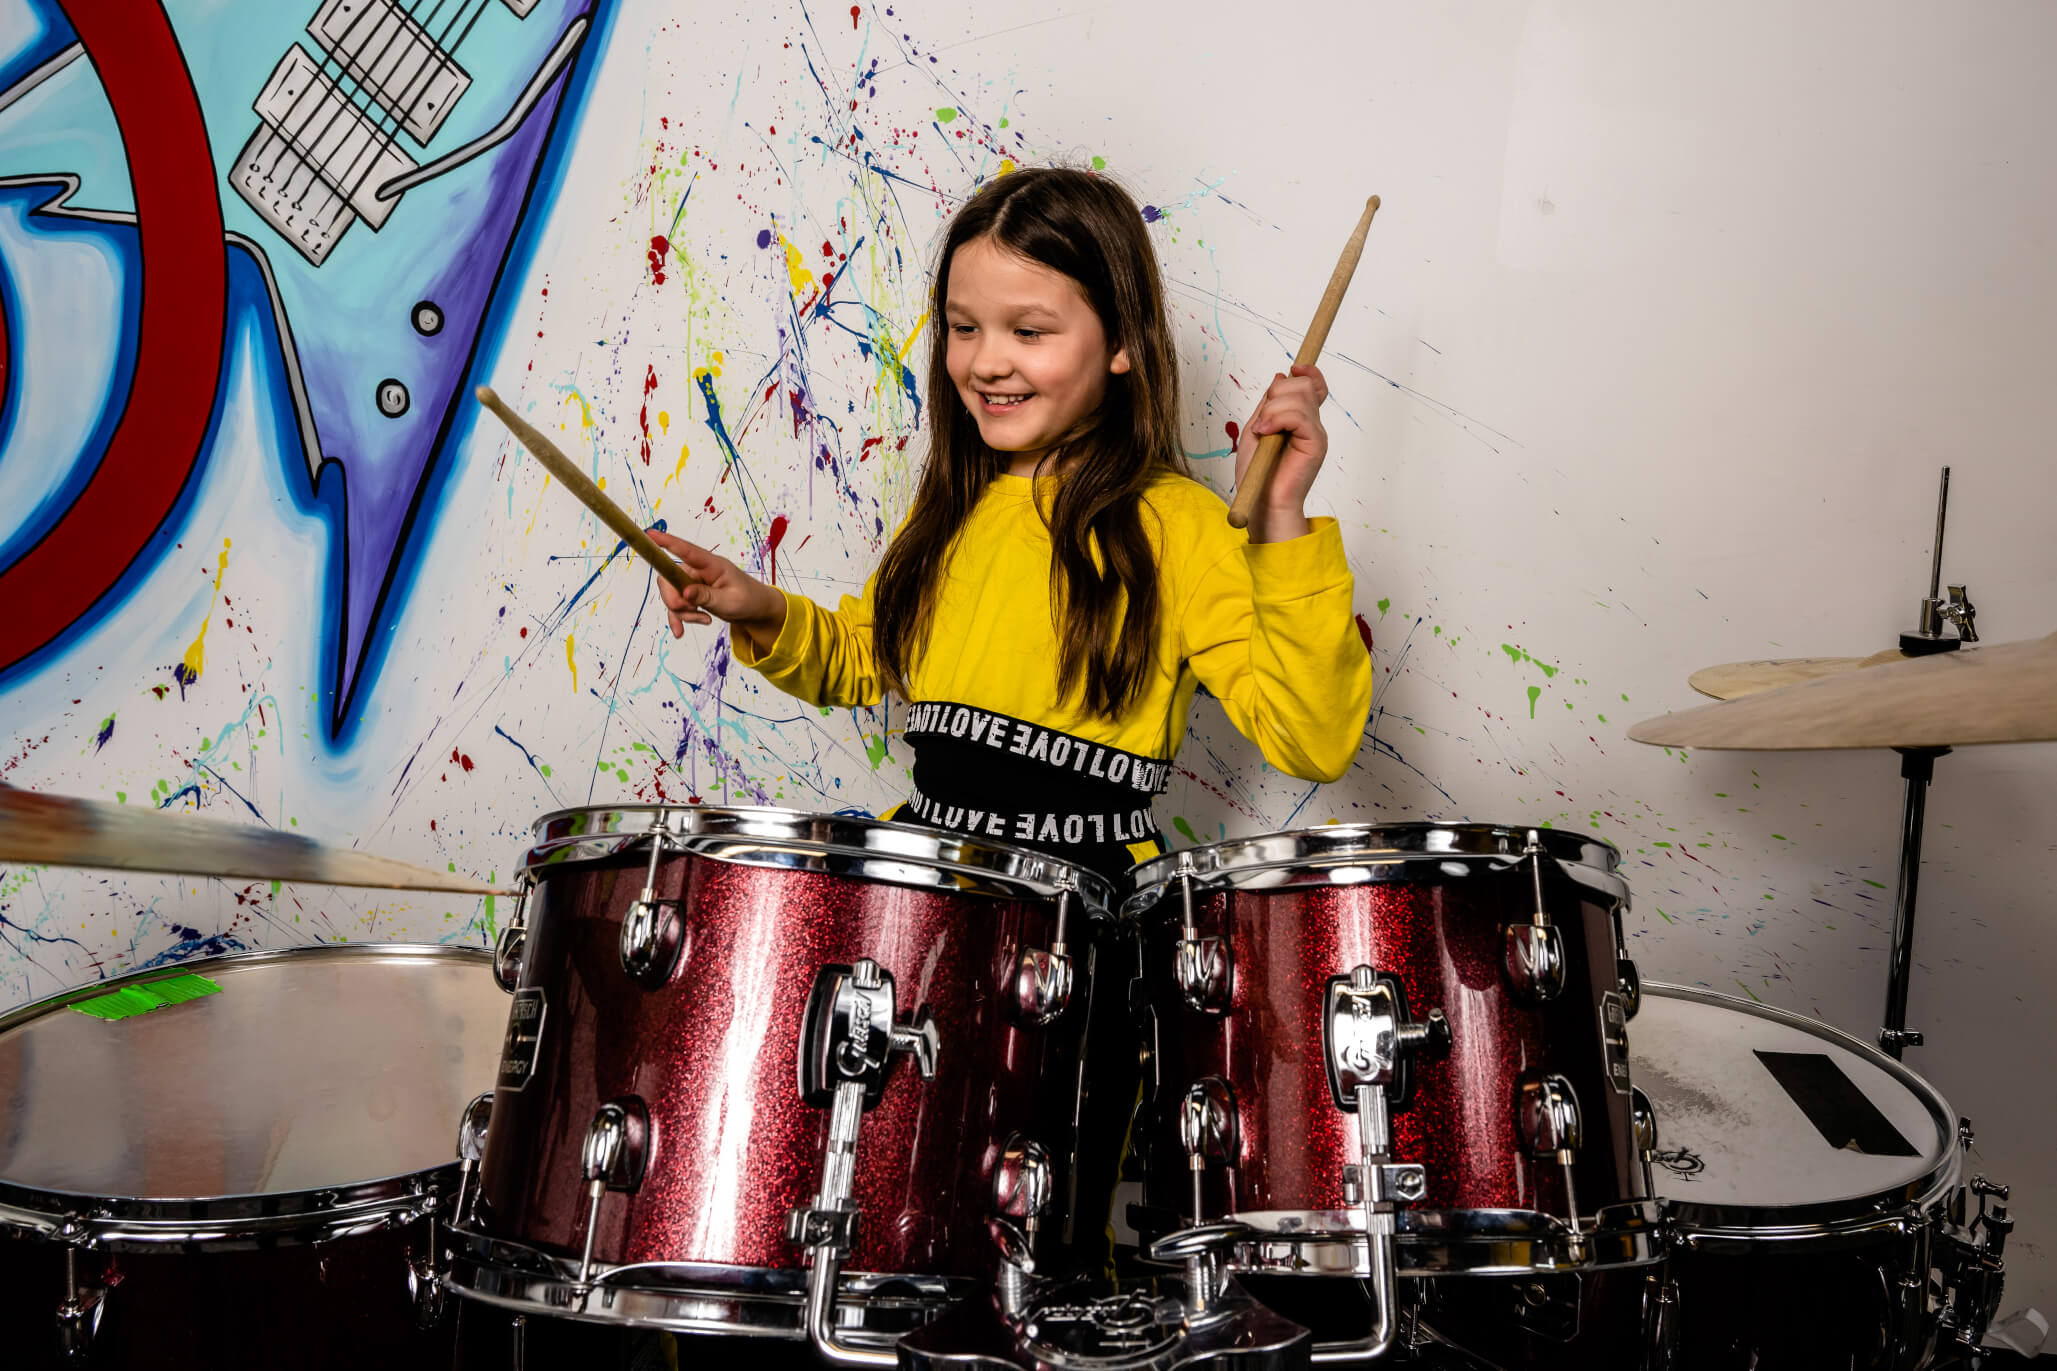 Banging the drum for music in schools, Music